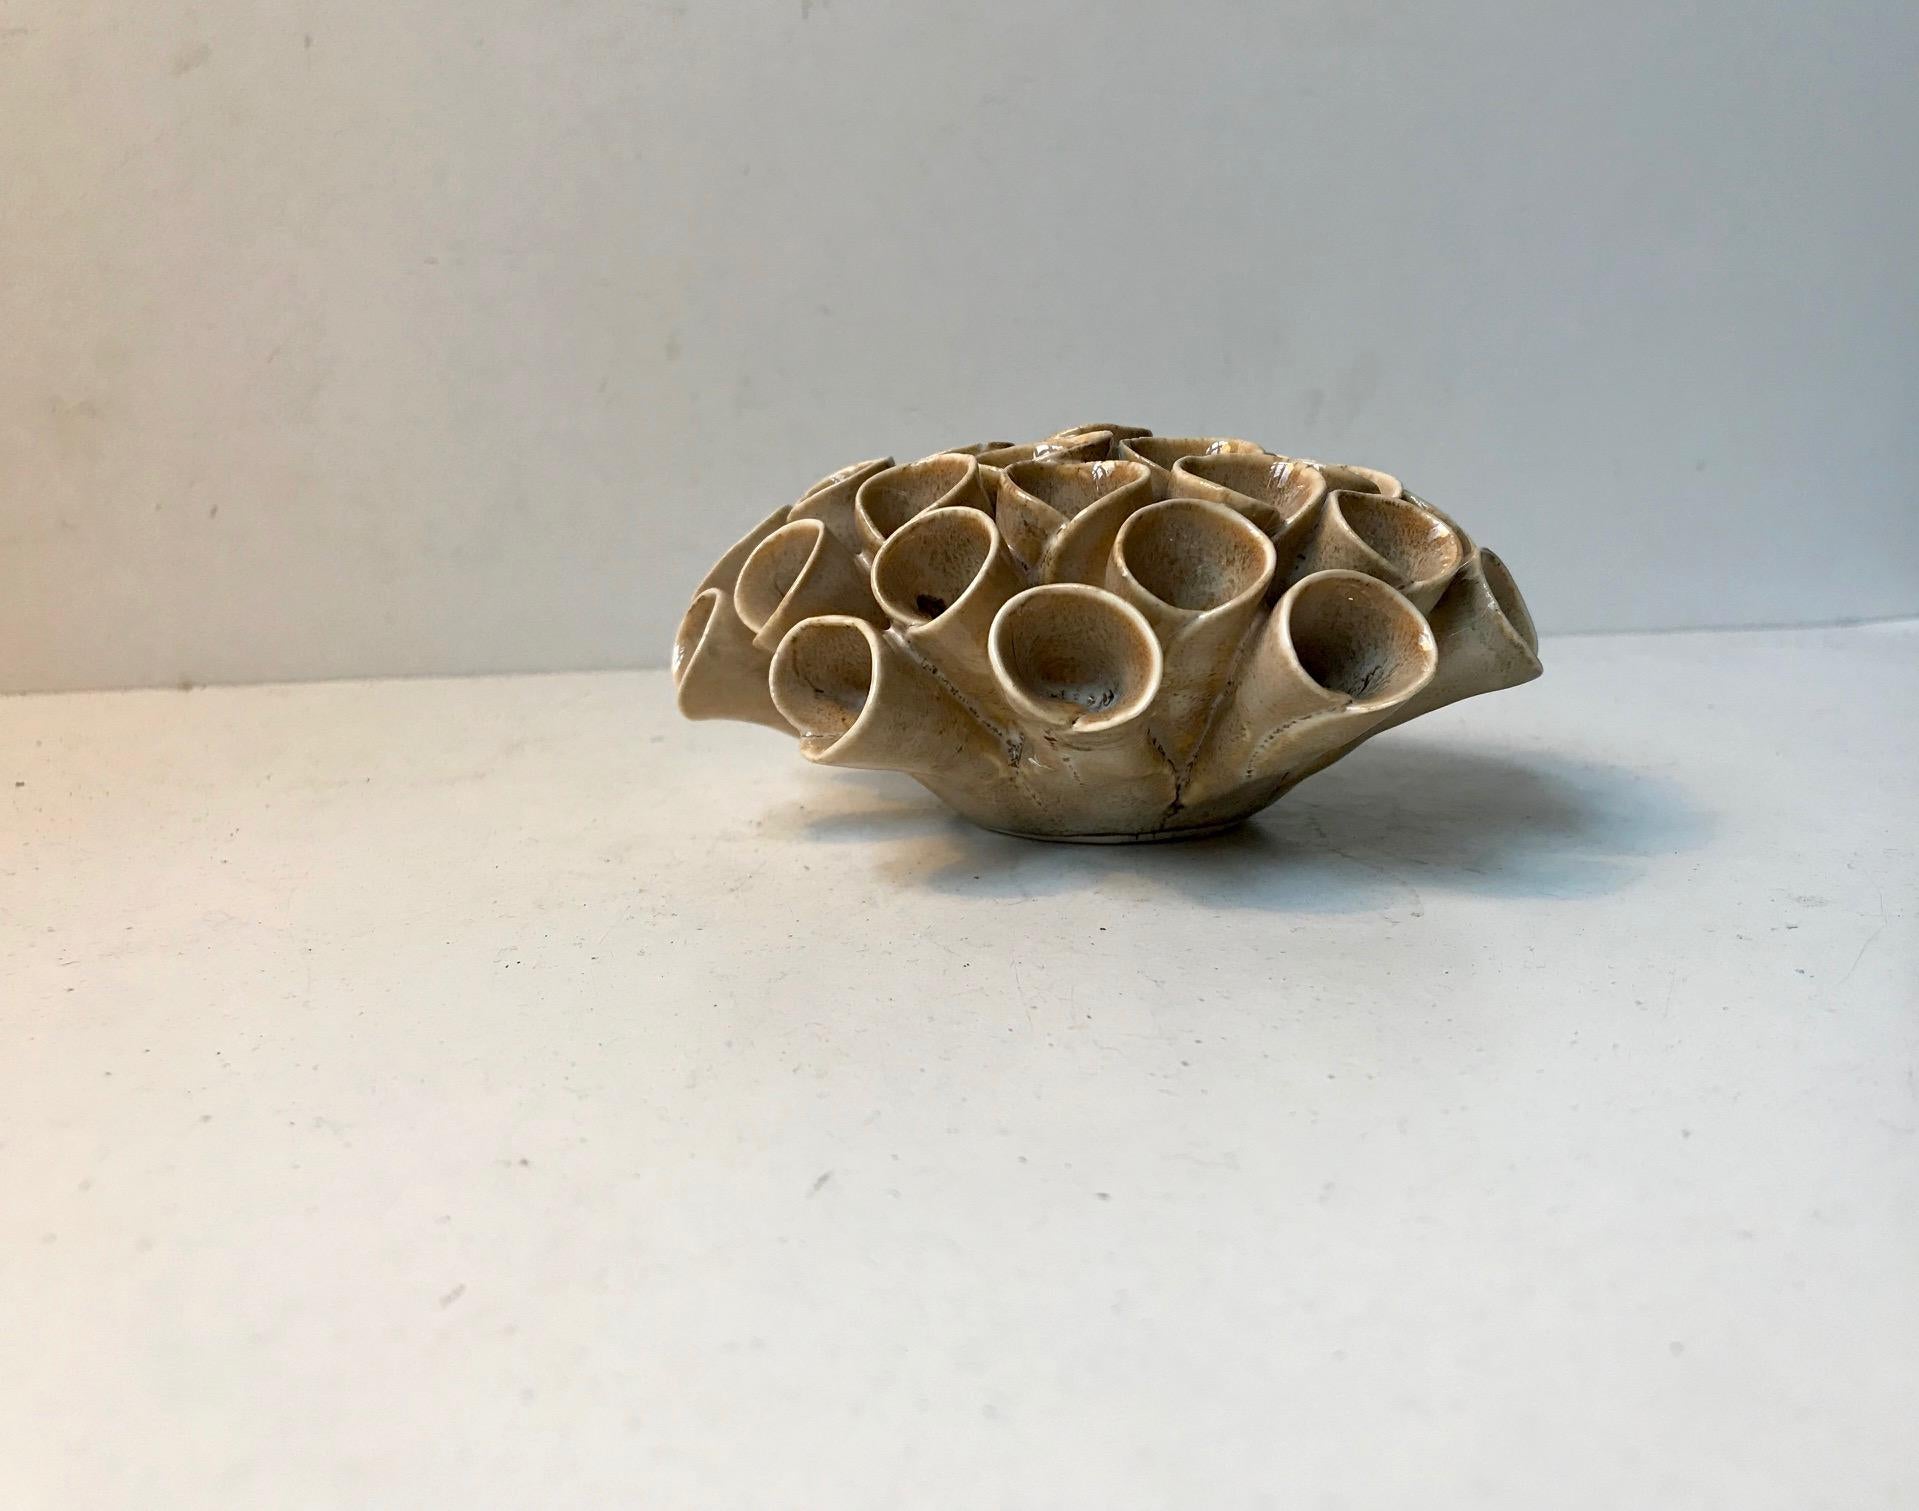 Complicated clay work controlling these fragile coral 'tentacles'. An unusual Danish vase with applied natural colored glazed. LEI - unidentified Danish ceramist, circa 1980.